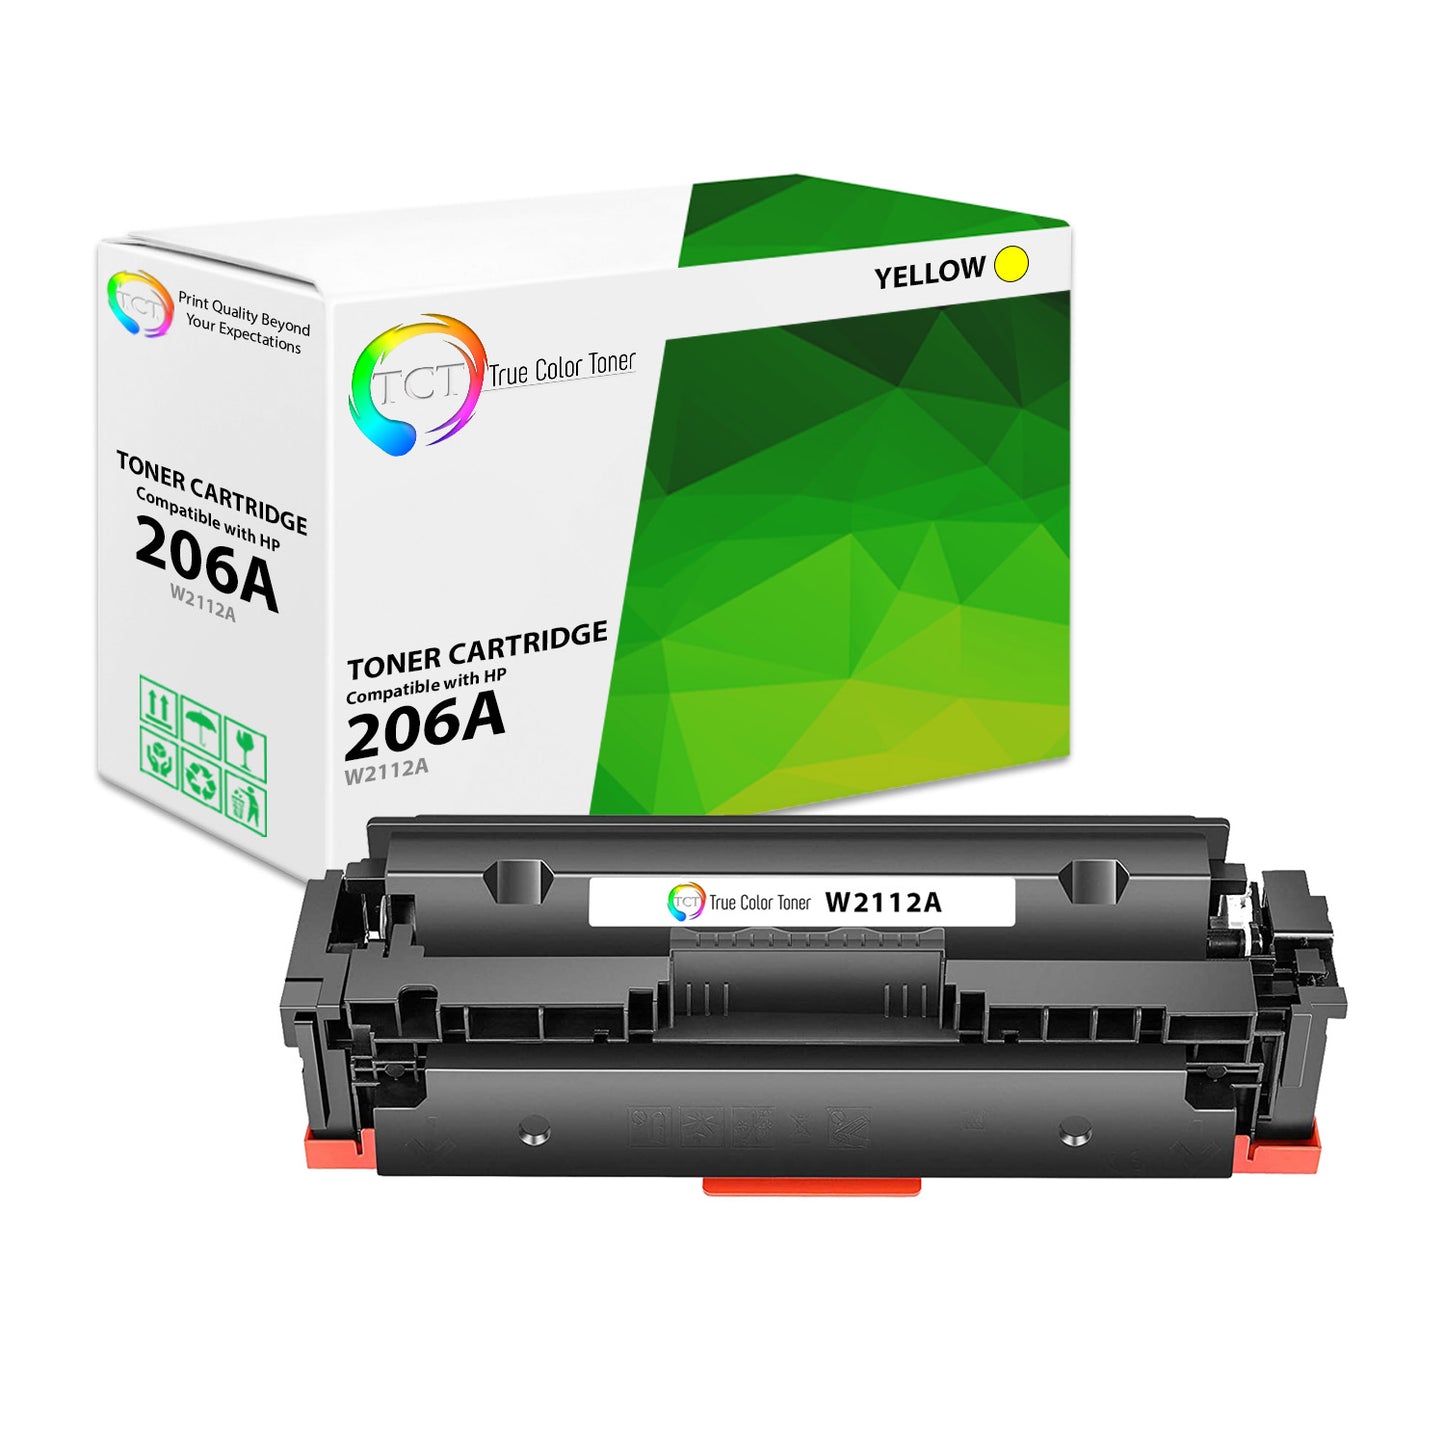 TCT Compatible Toner Cartridge Replacement for the HP 206A Series - 1 Pack Yellow